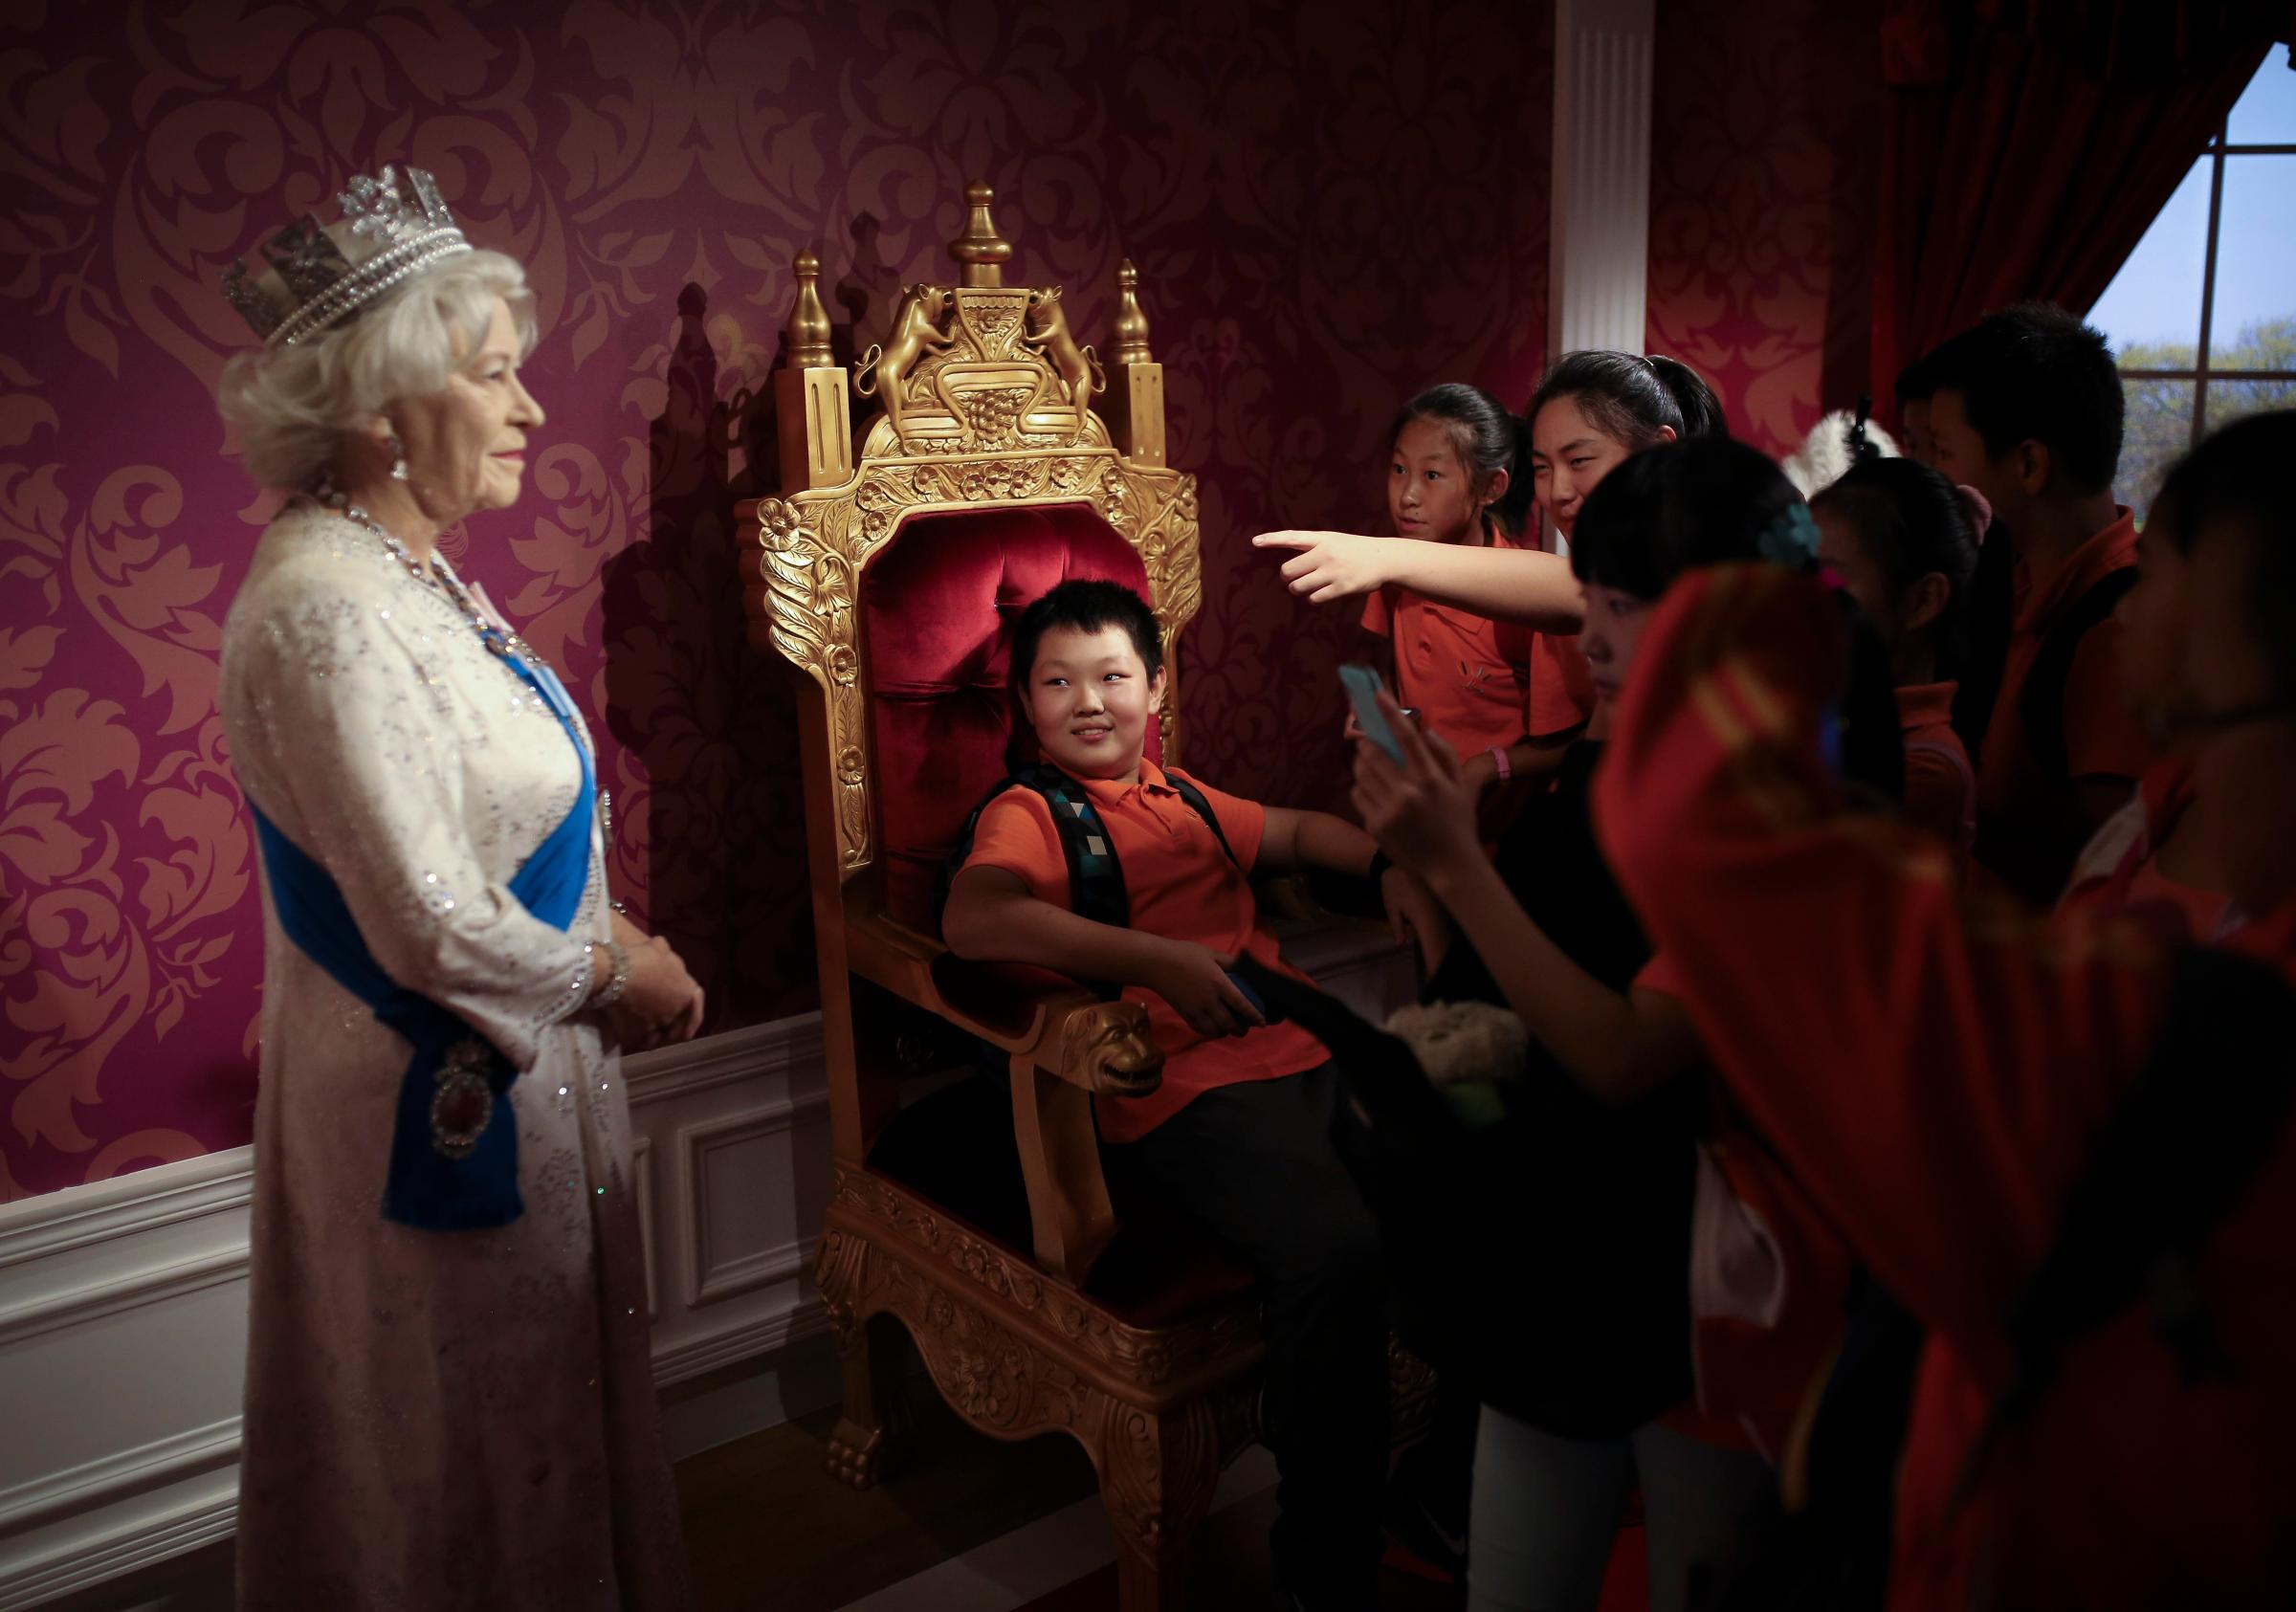 A student sitting on a mock-up of the royalty chair, looks at a wax figure of Britain's Queen Elizabeth II, while others take souvenir photos, at the Madame Tussauds Museum in Beijing on Sept. 19, 2014.